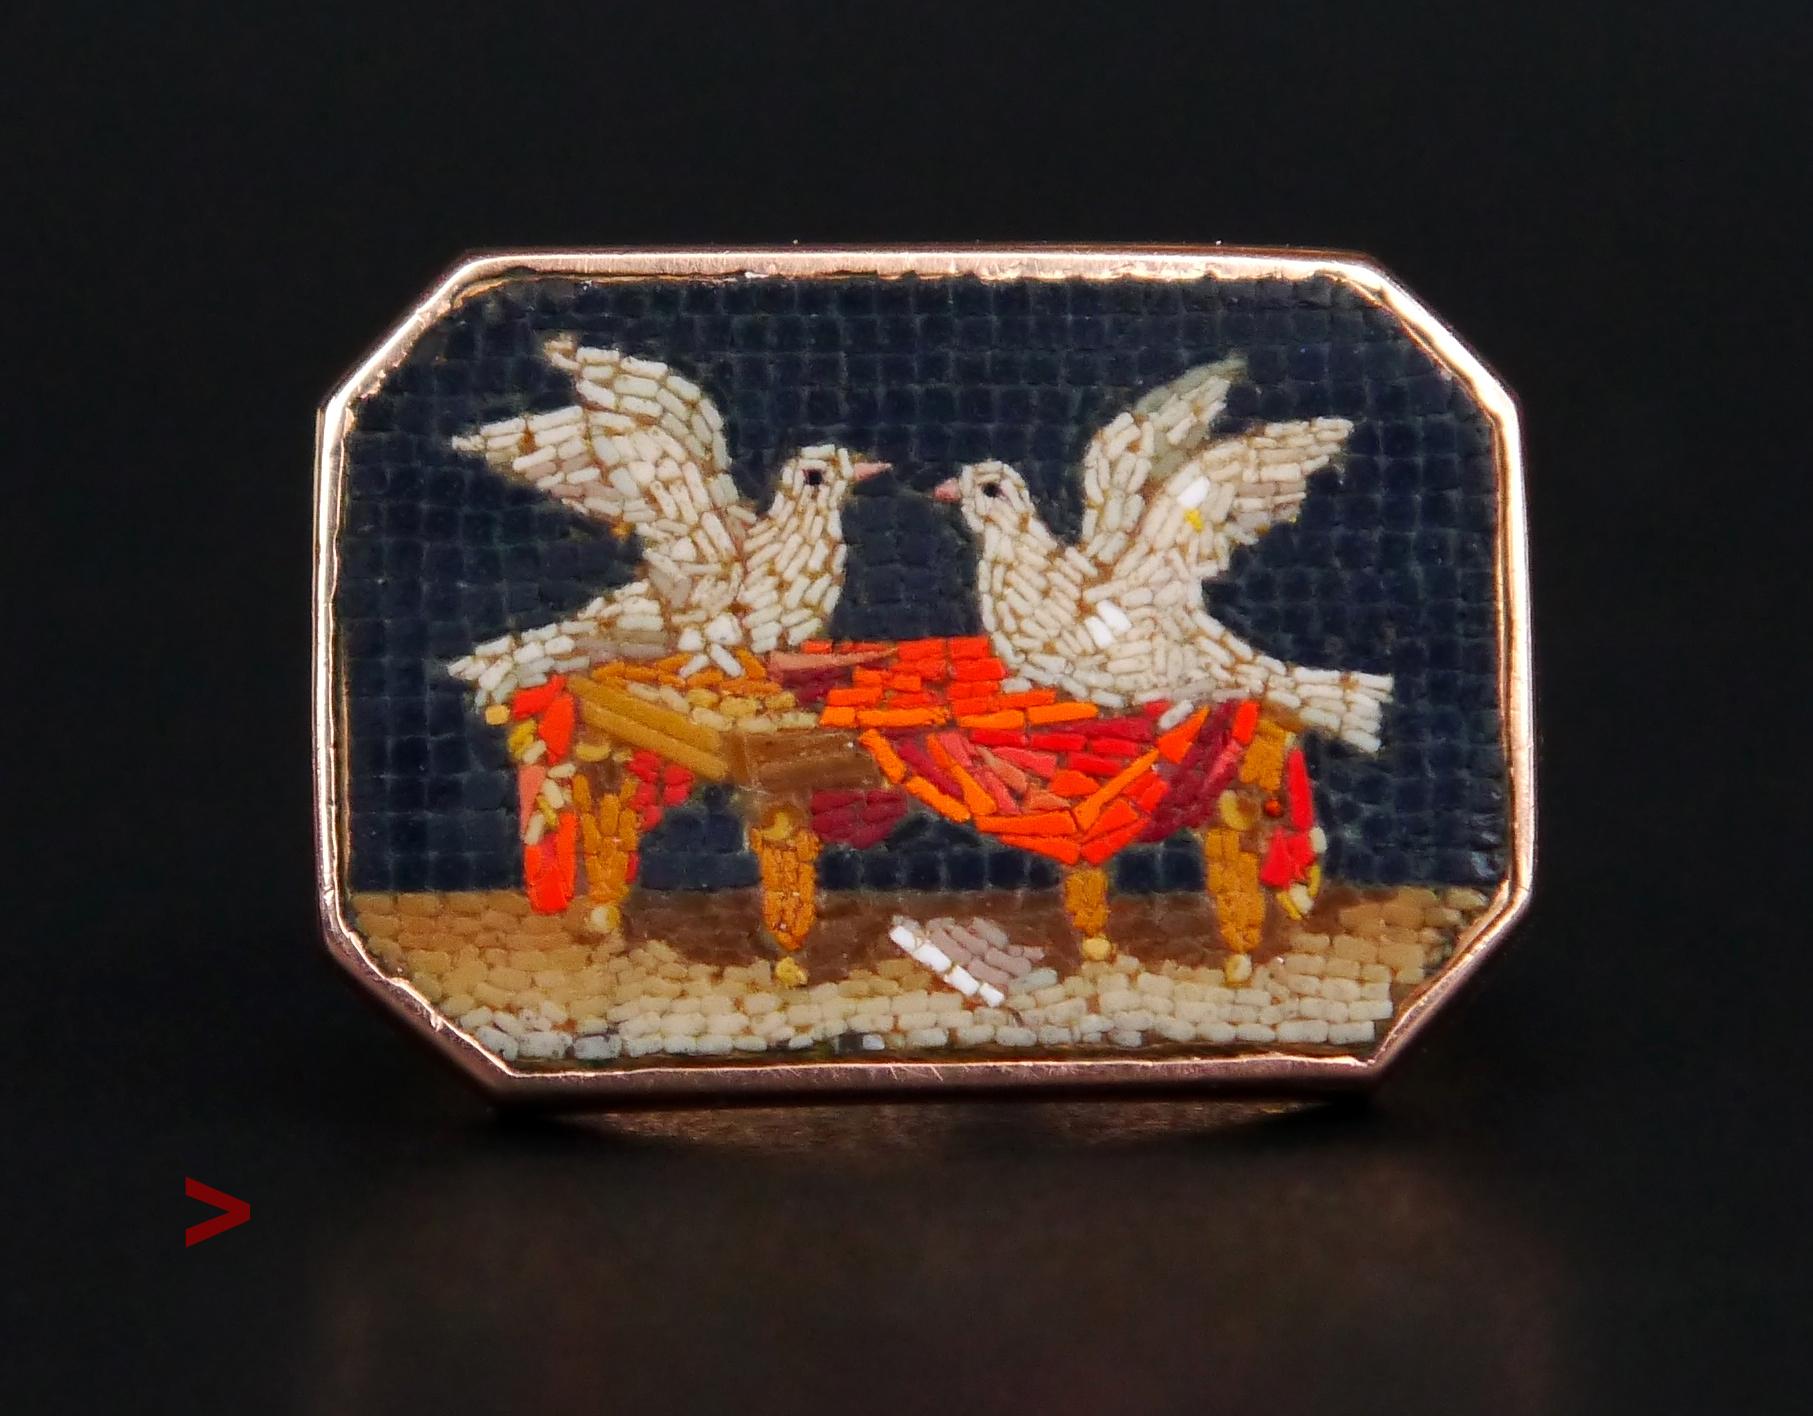 Gorgeous old Italian octagonal Micromosaic scene of Two Doves nesting together in the folds of a red cloak.

The Mosaica is embedded into slick shaped solid 18K Rose Gold frame.True Art lover's jewelry form,this ring is unisex and will look great on